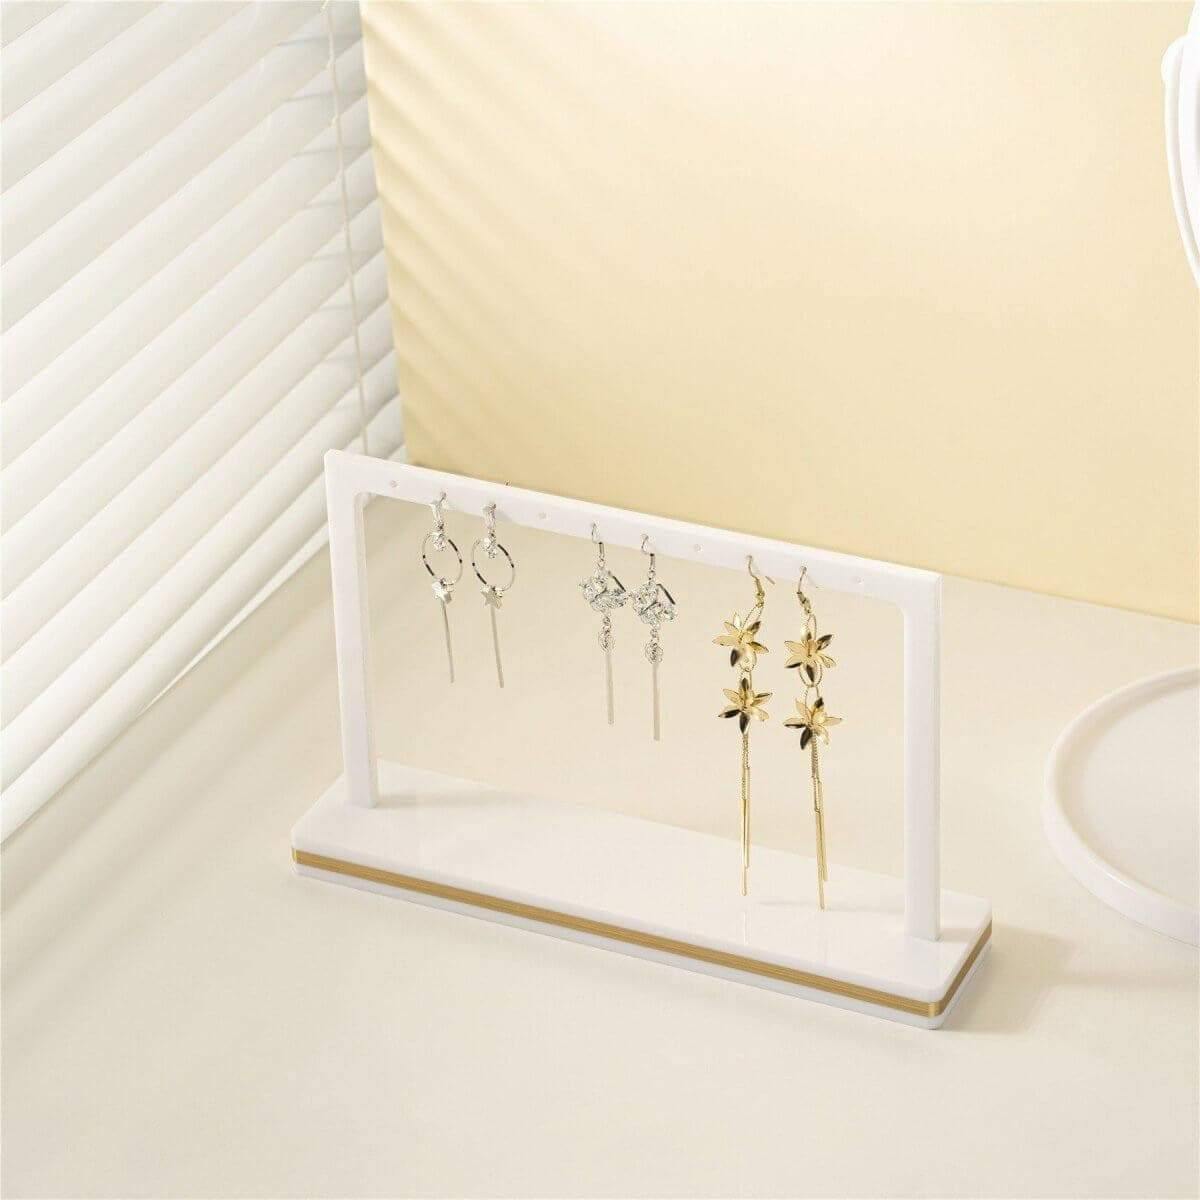 acrylic earring display stand earring display earring display stand Elitnus Acrylic Earring Display Stand - 2 Pack White Acrylic Earring Organizer - T Bar Earring Stands for Shows YIFU DISPLAY